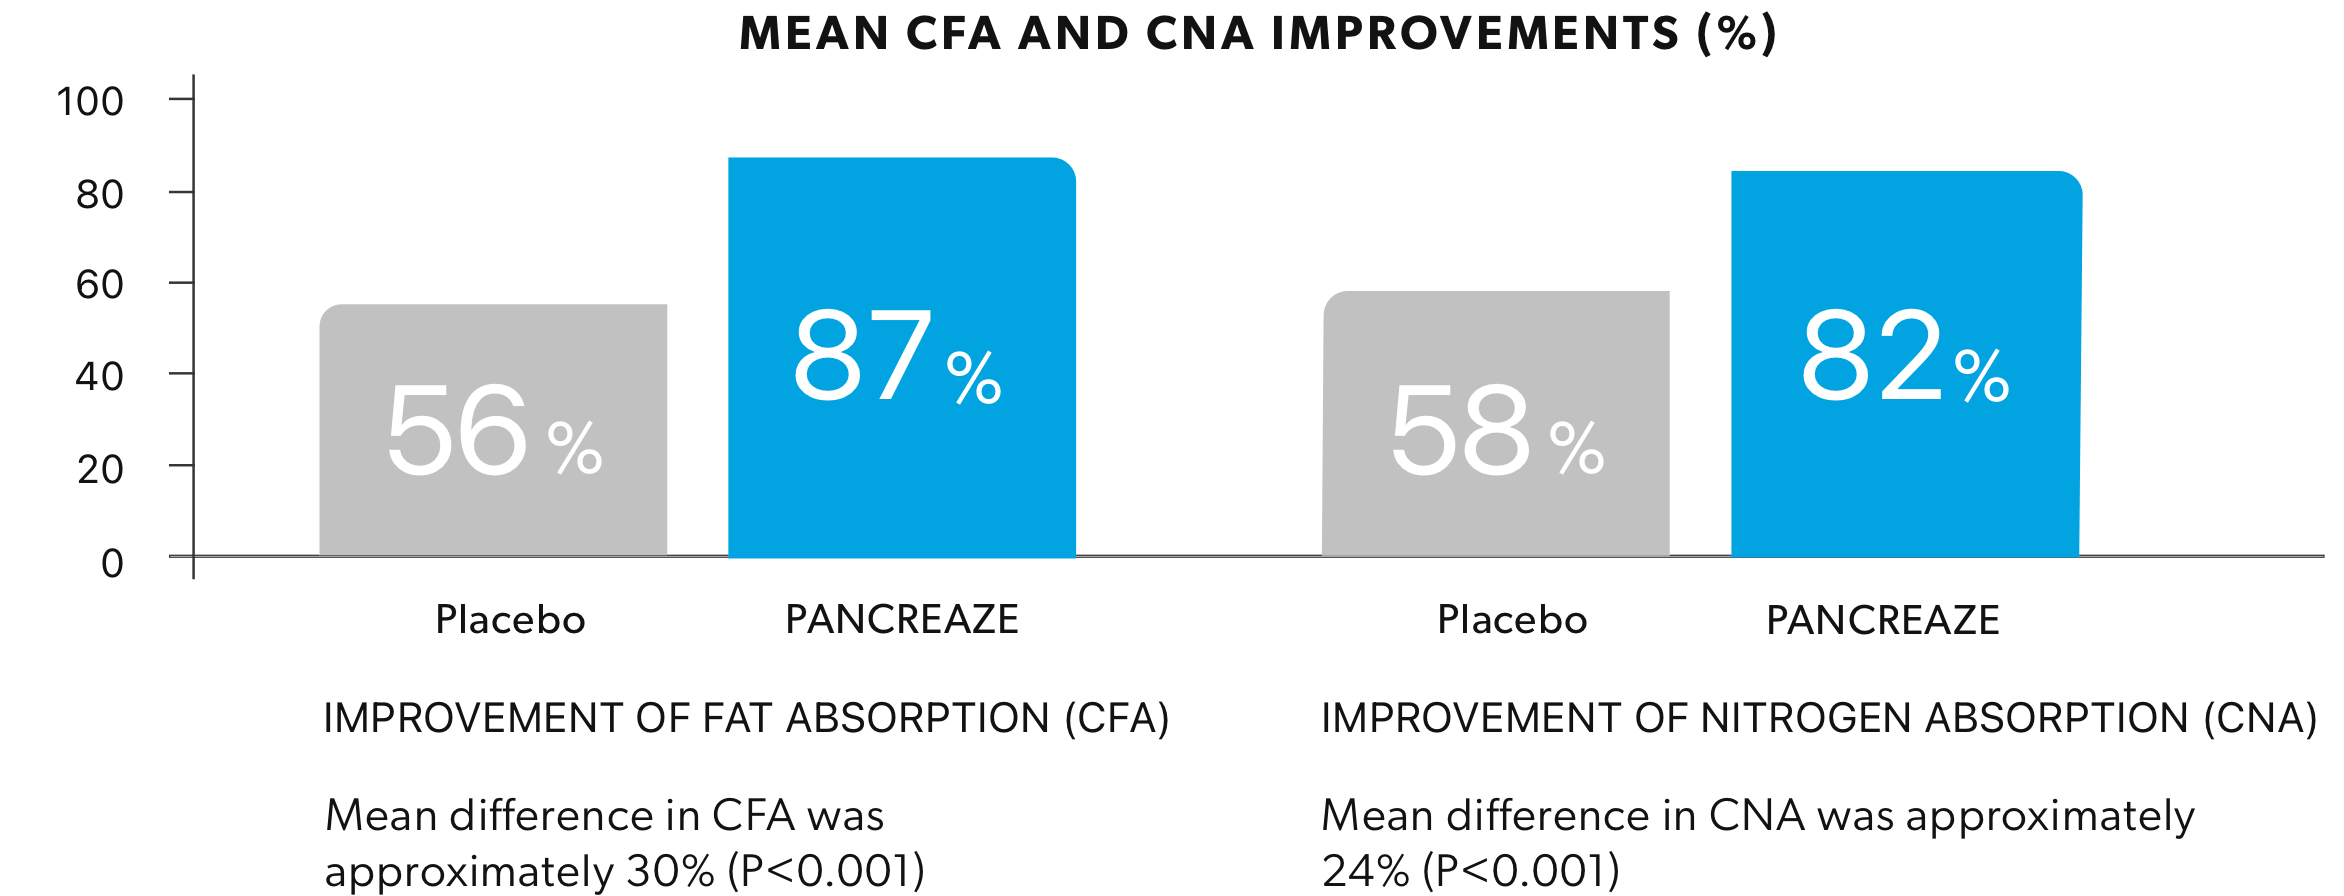 Improvement of Fat Absorption (CFA)*. Mean difference in CFA was approximately 30% (P<0.001). Improvement of Nitrogen Absorption (CNA)*. Mean difference in CNA was approximately 24% (P<0.001).